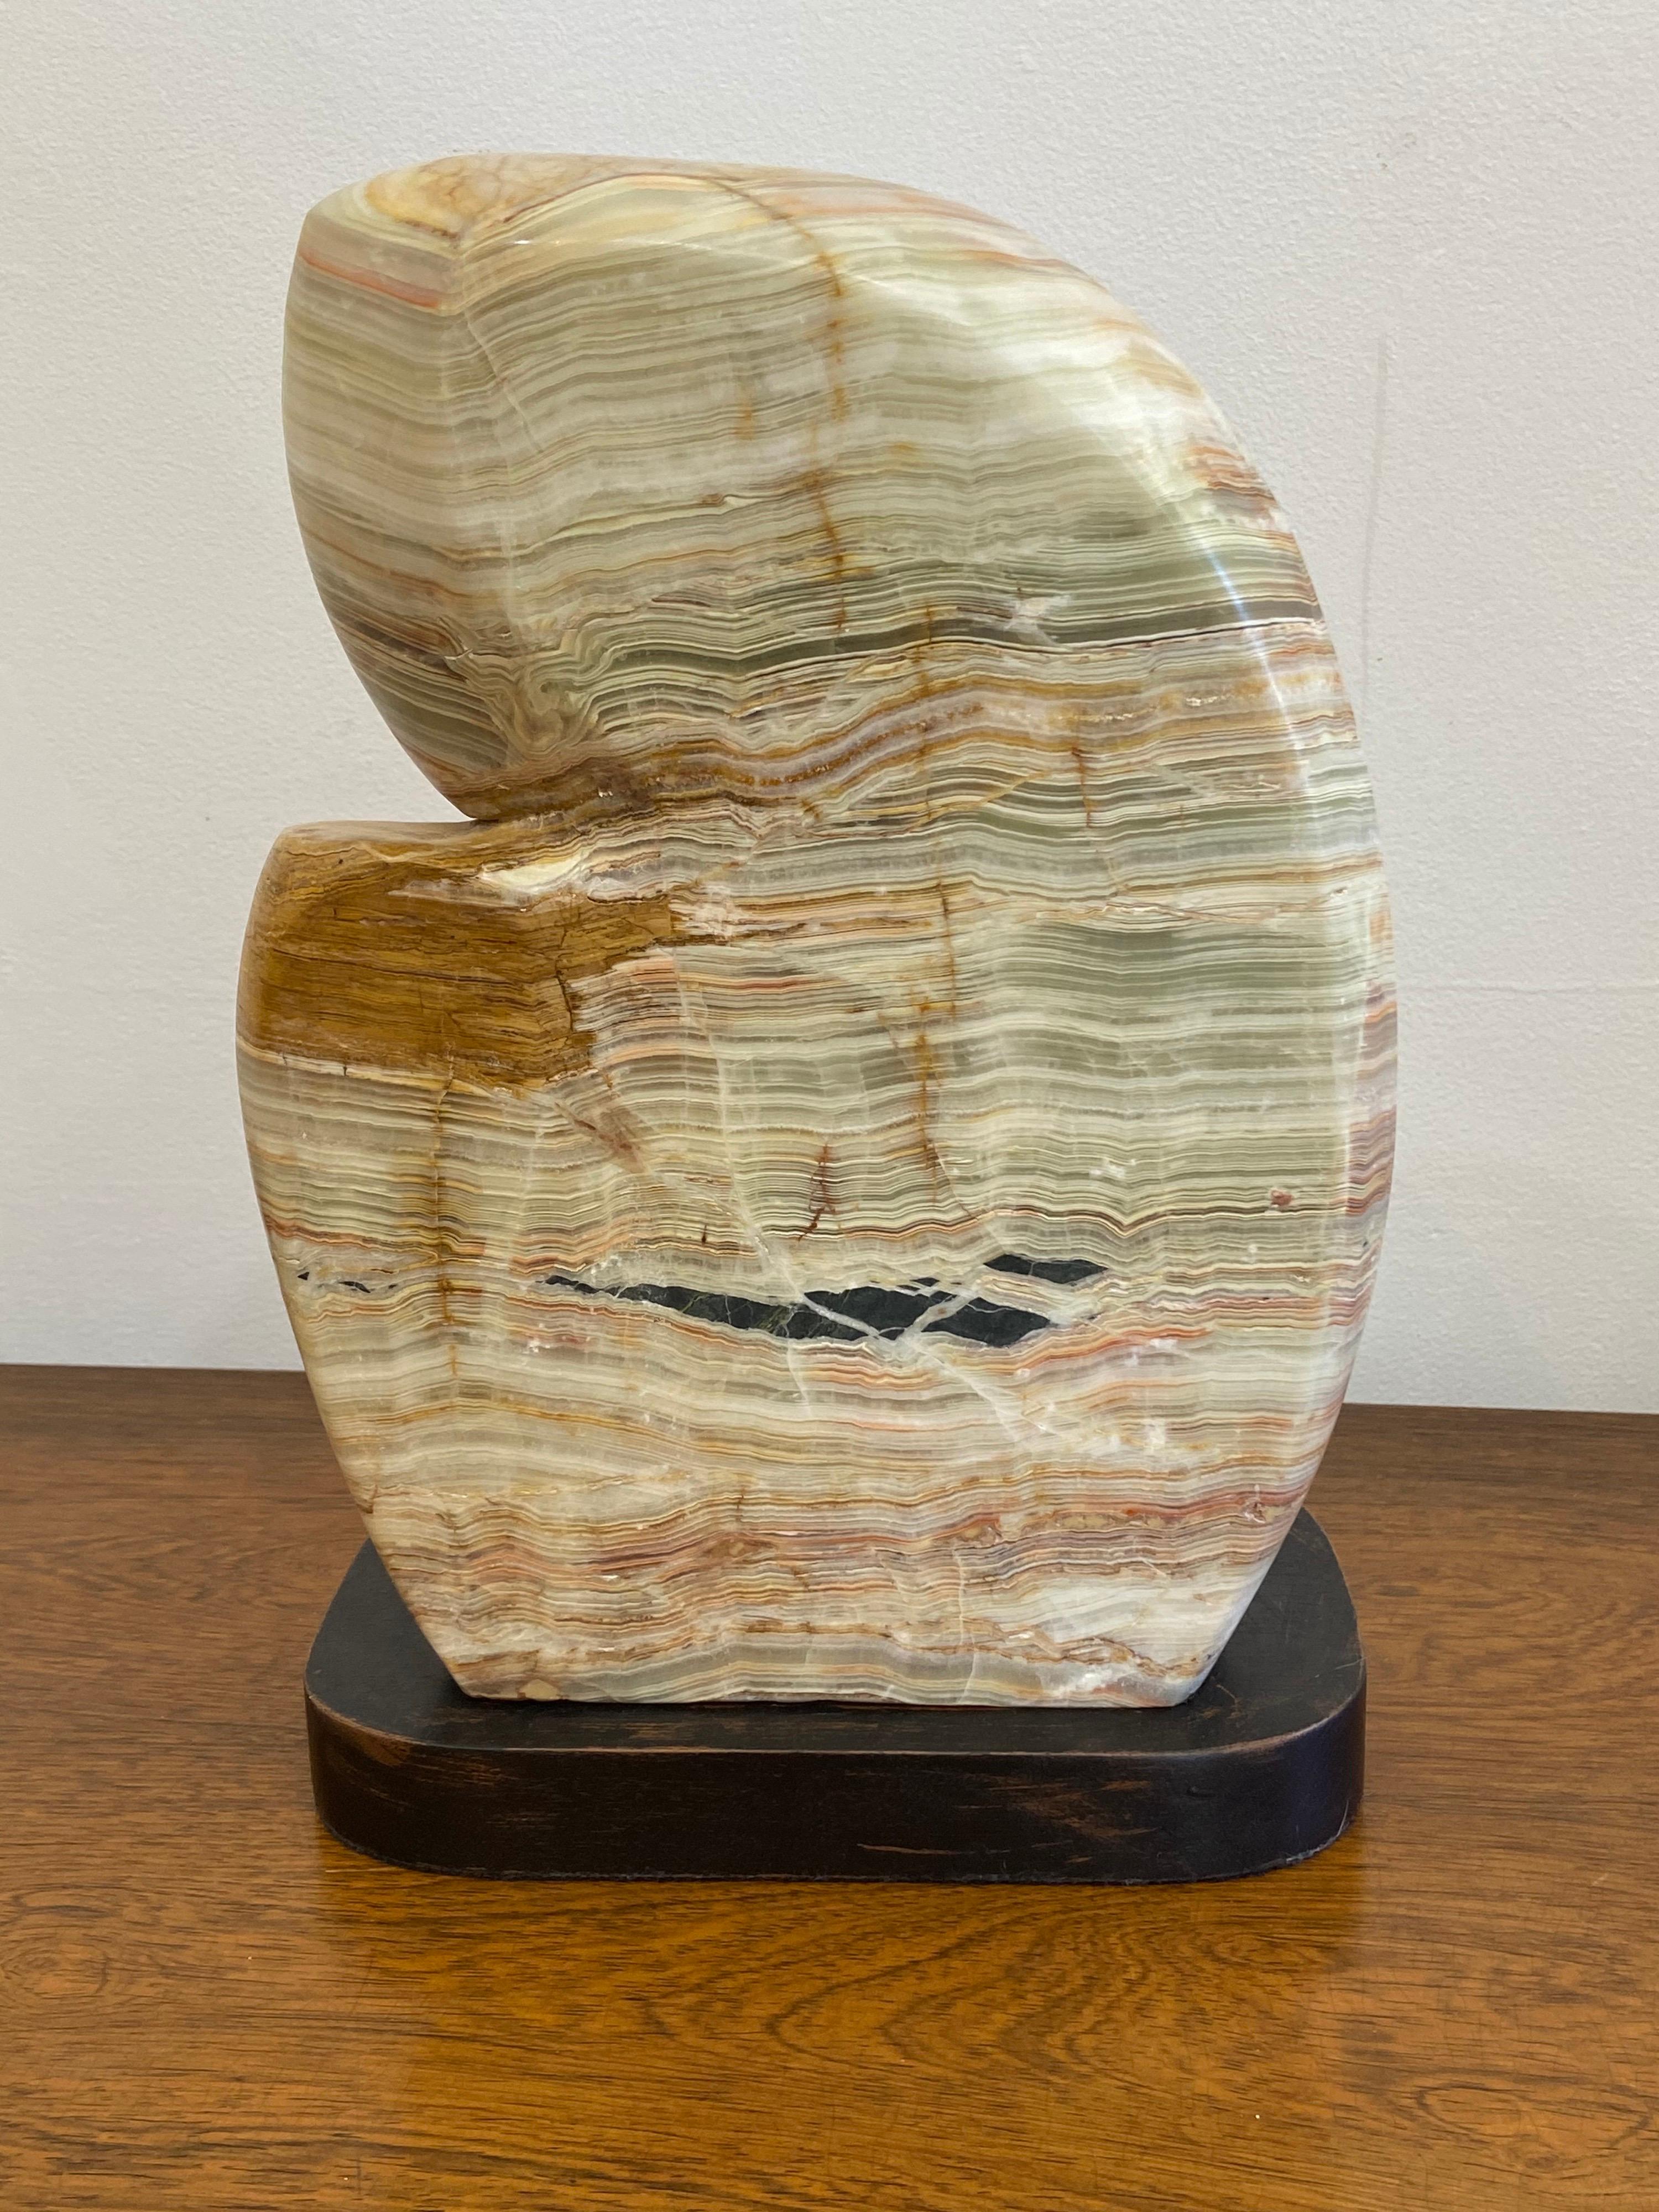 Abstract agate sculpture on wood base.